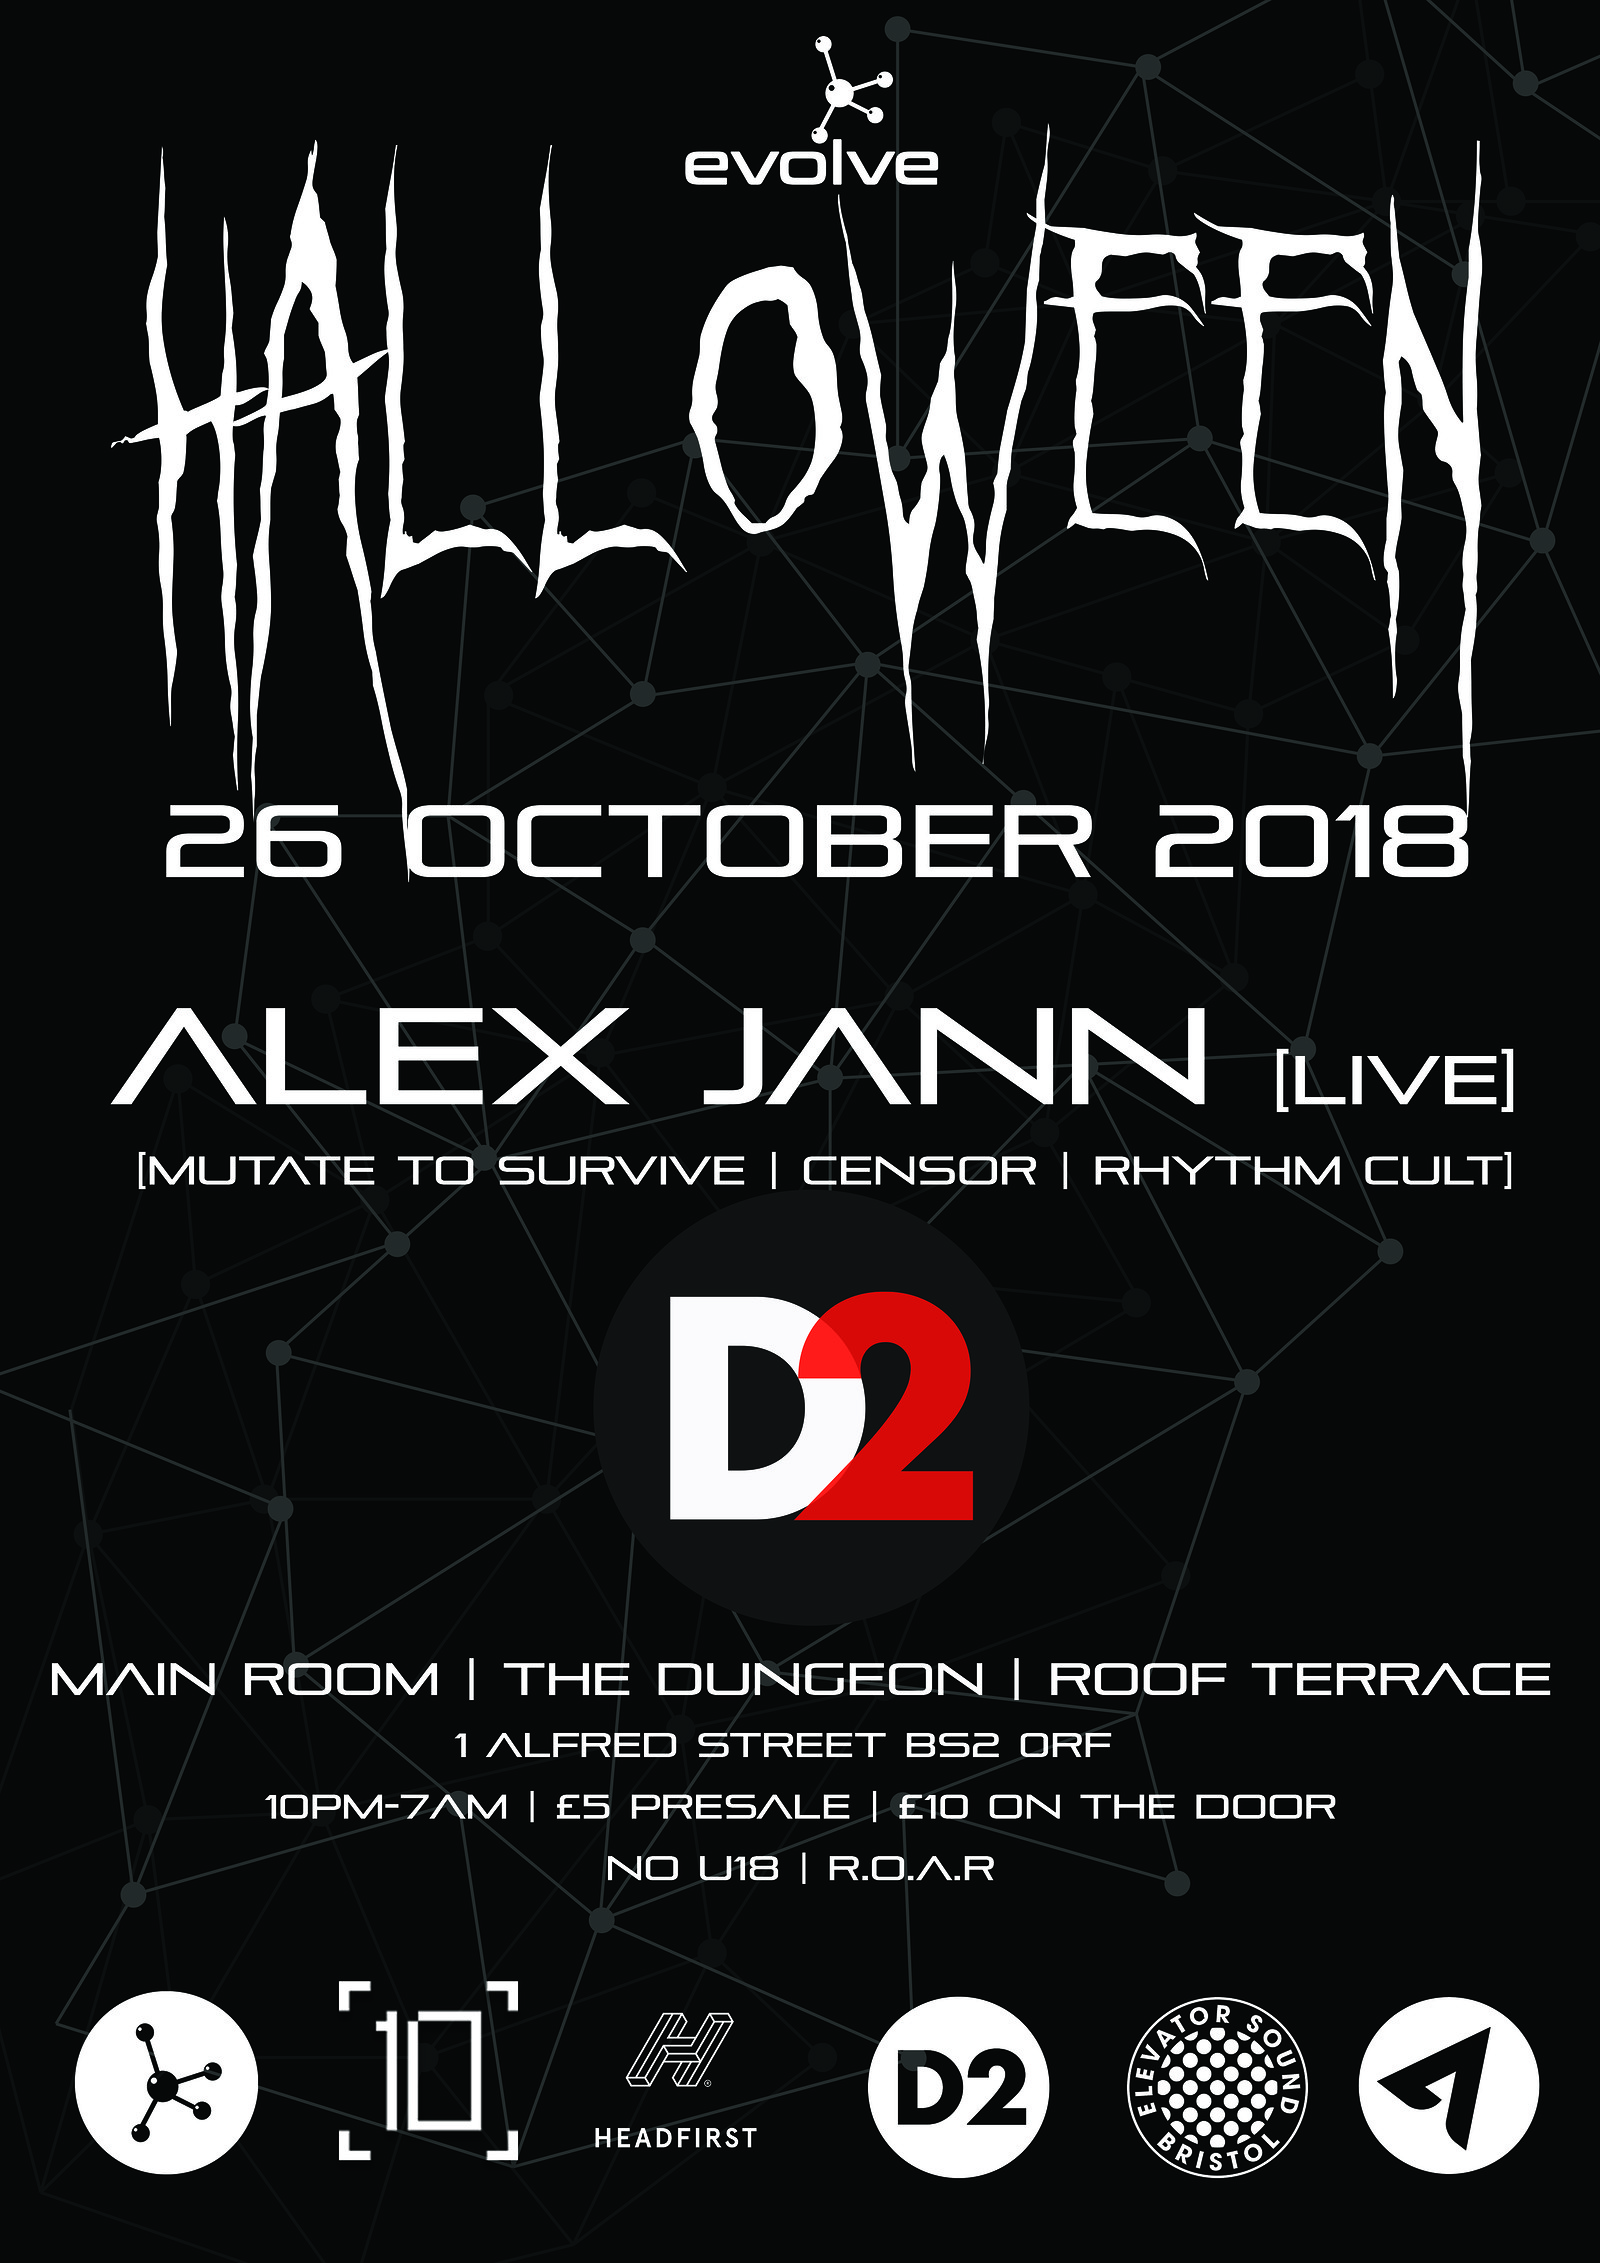 Halloween Evolved featuring Alex Jann at Dare to Club